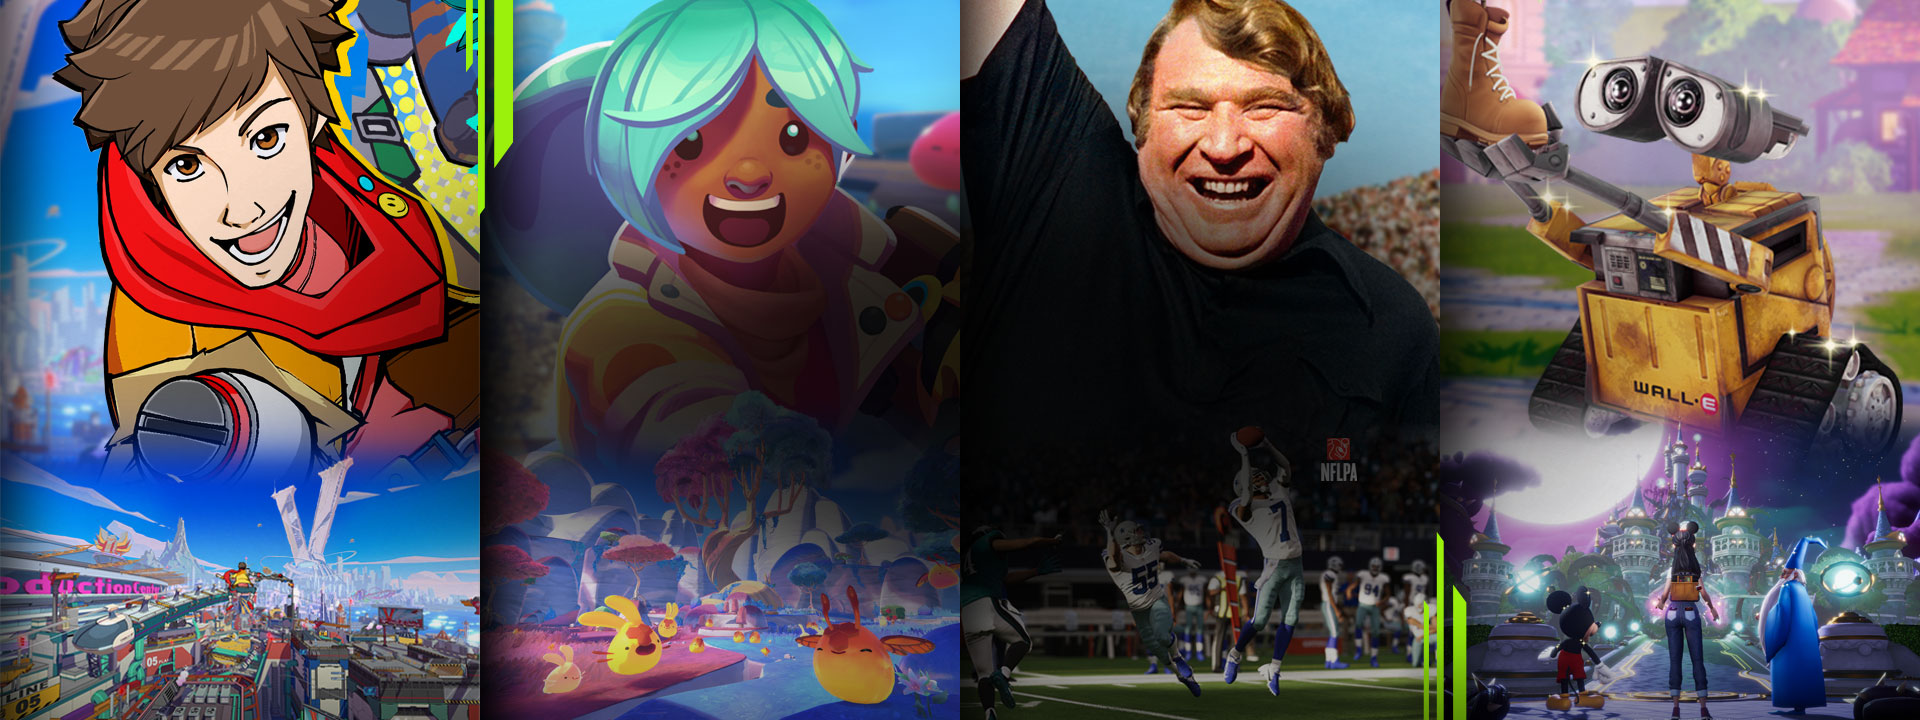 A selection of games available with Xbox Game Pass including Hi-Fi RUSH, Slime Rancher 2, Madden NFL 23 and Disney Dreamlight Valley.